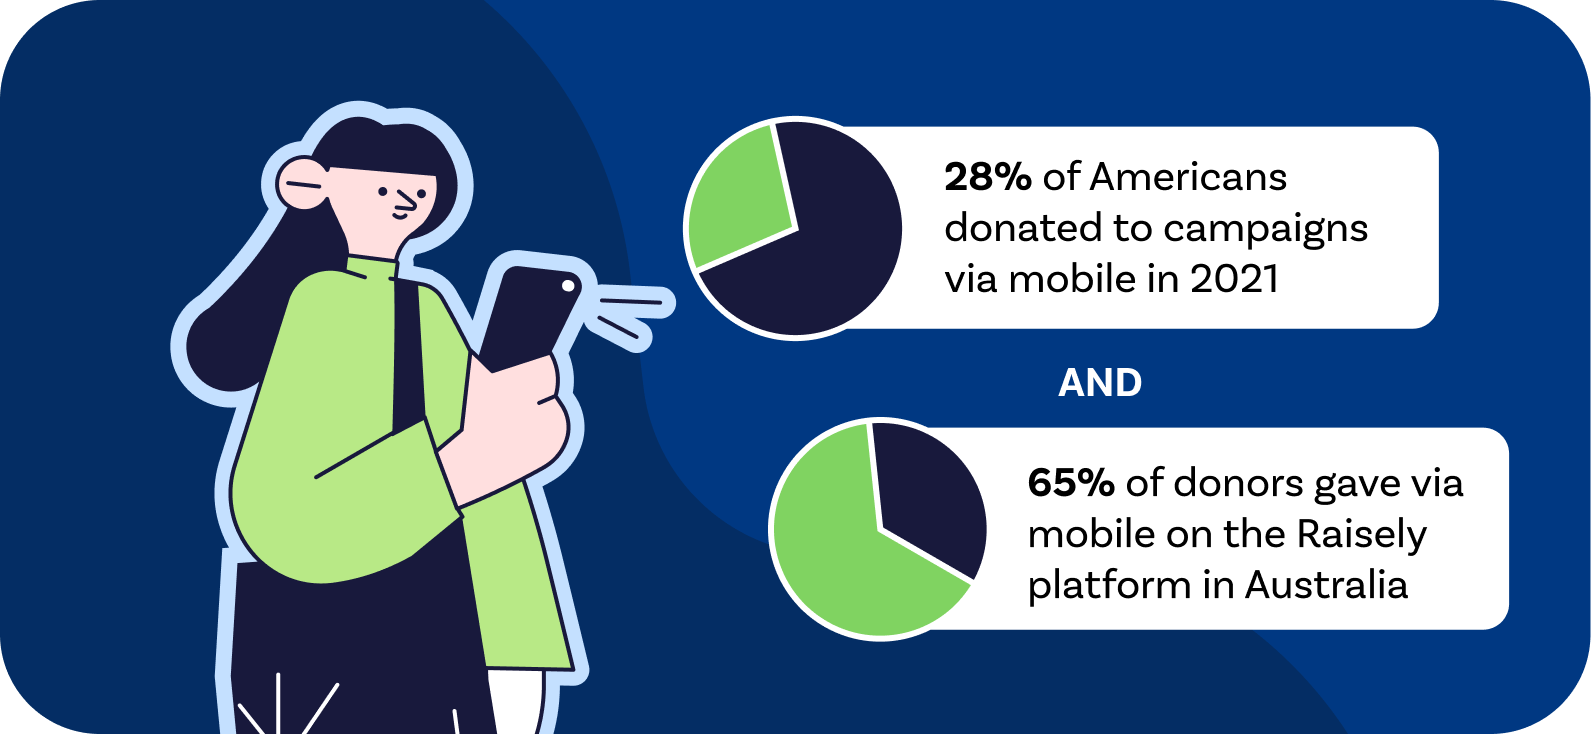 28% of Americans donated to campaigns via mobile in 2021, and in Australia, 65% of donors gave via mobile on the Raisely platform.